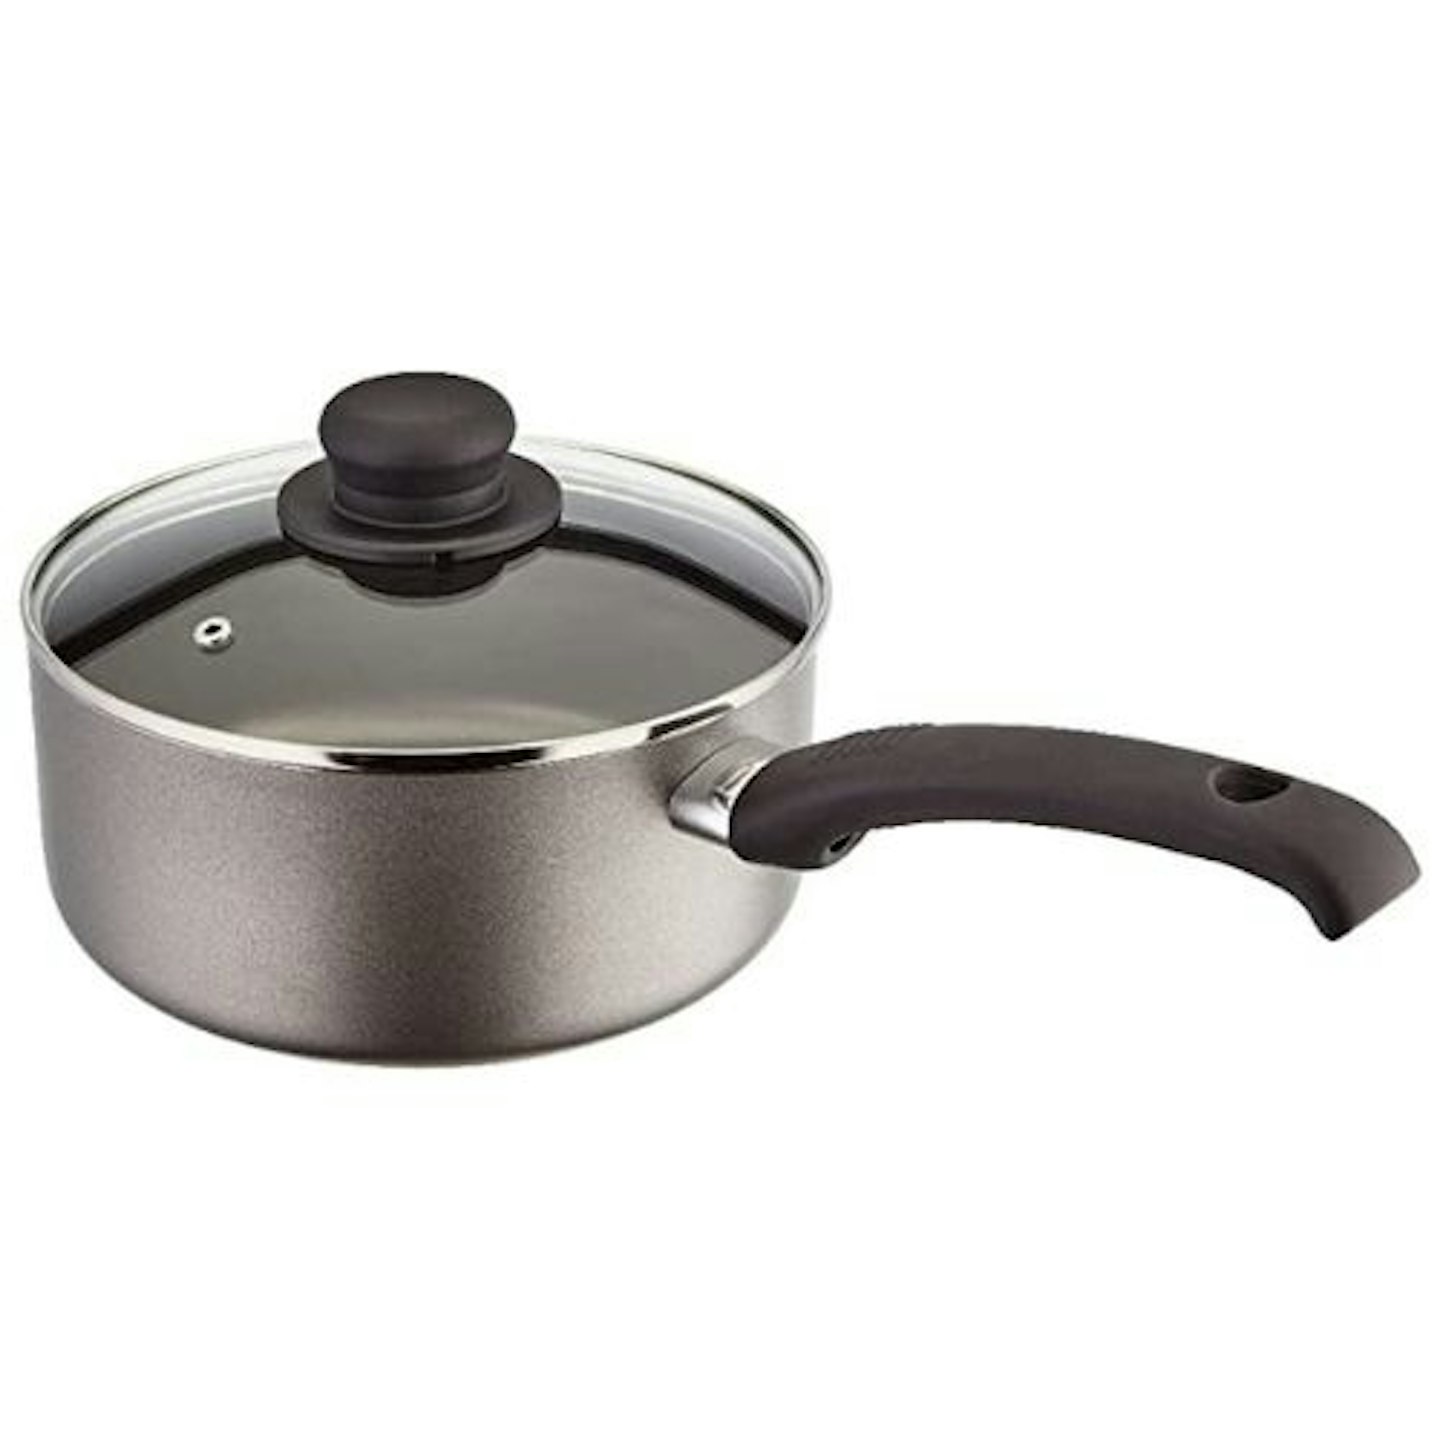 Judge Everyday Teflon Non-Stick Pan with Stay Cool Handle